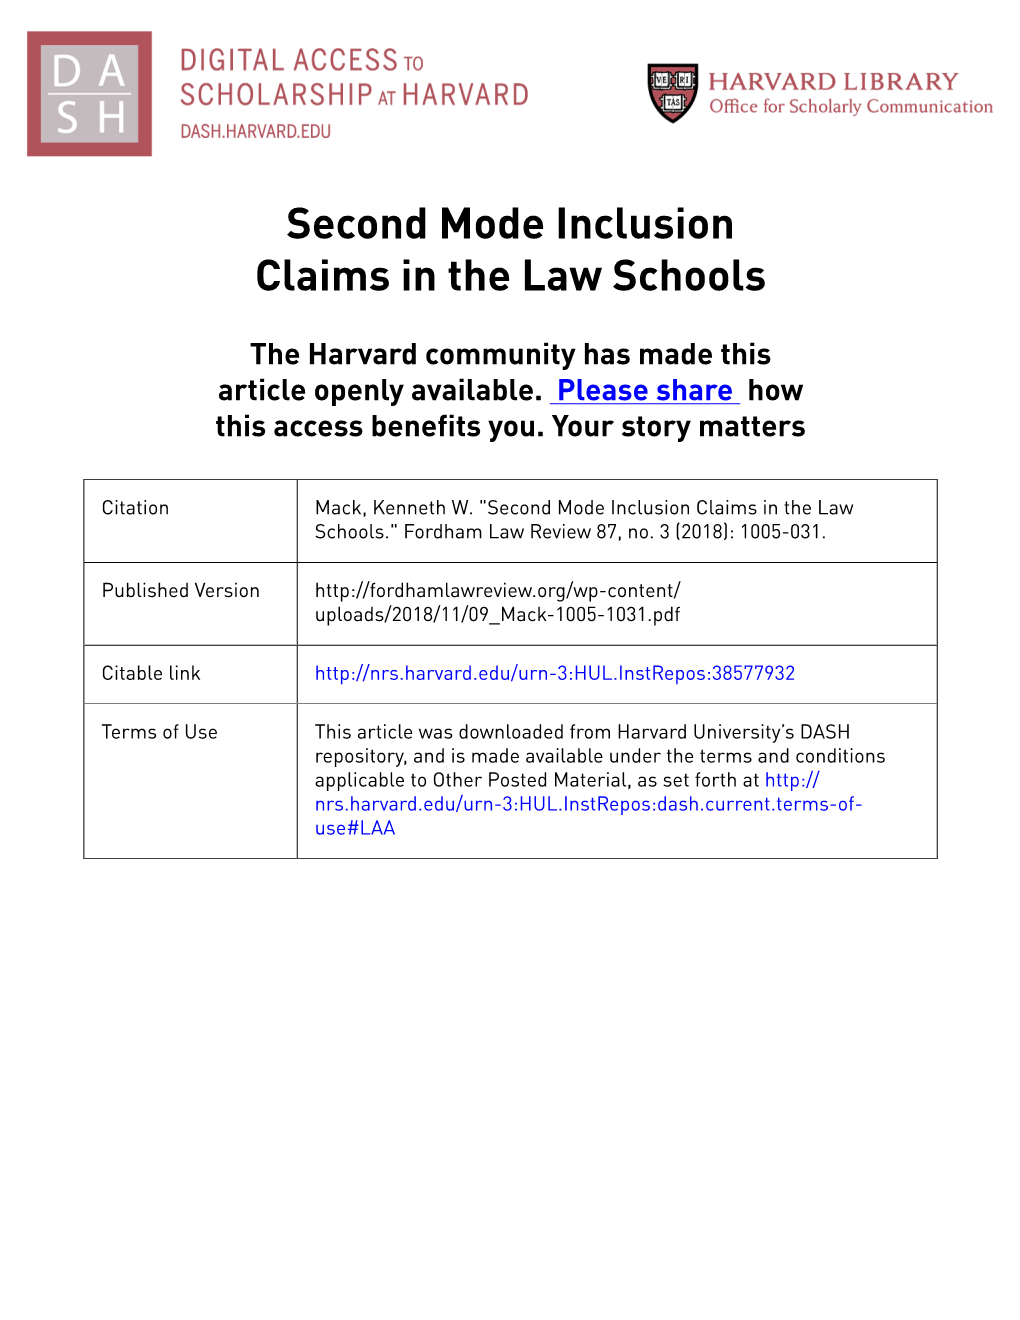 Second Mode Inclusion Claims in the Law Schools